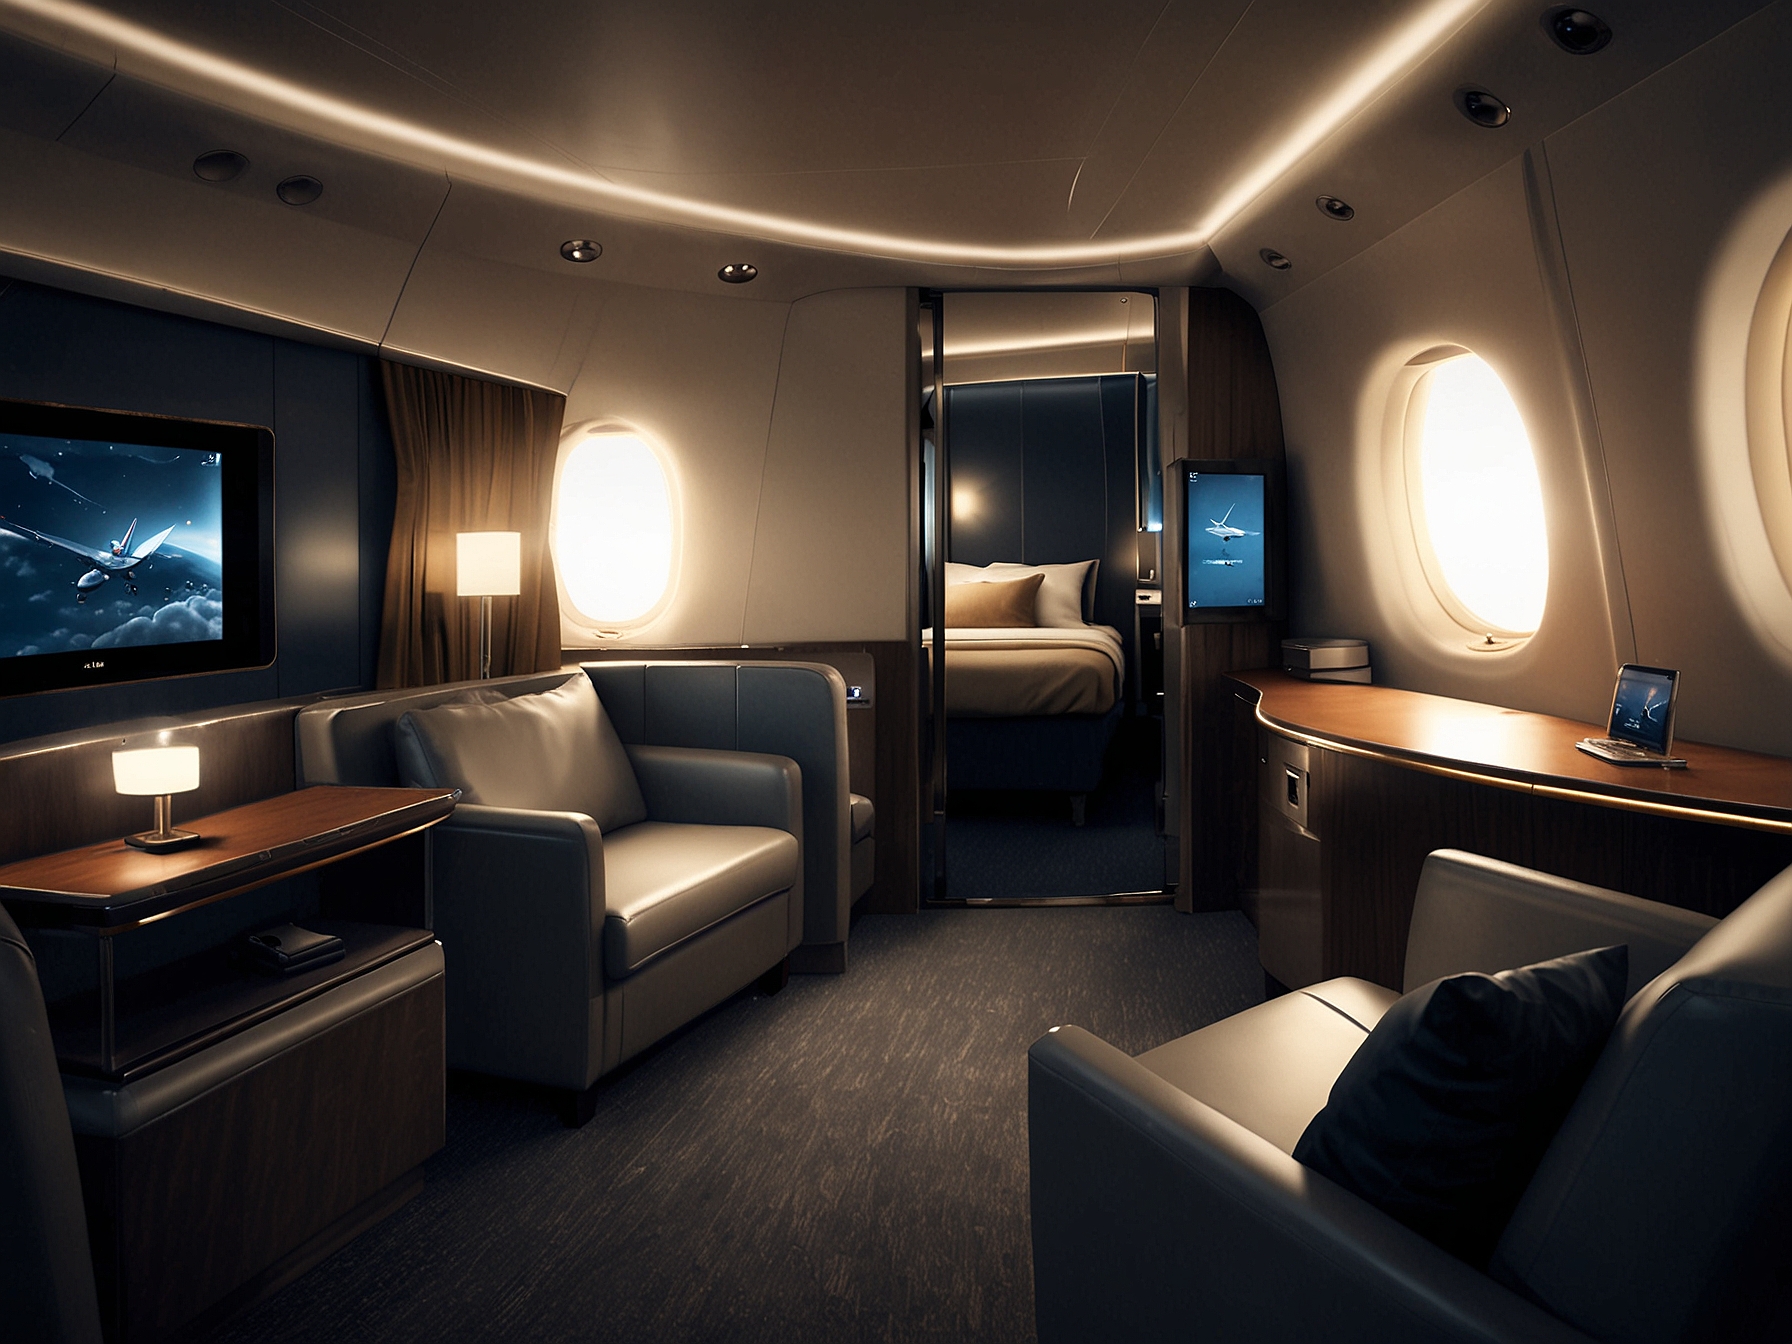 A luxurious private suite in British Airways' first-class cabin with high walls, sliding doors, a fully flat bed, and ambient lighting, epitomizing ultimate in-flight privacy and comfort.